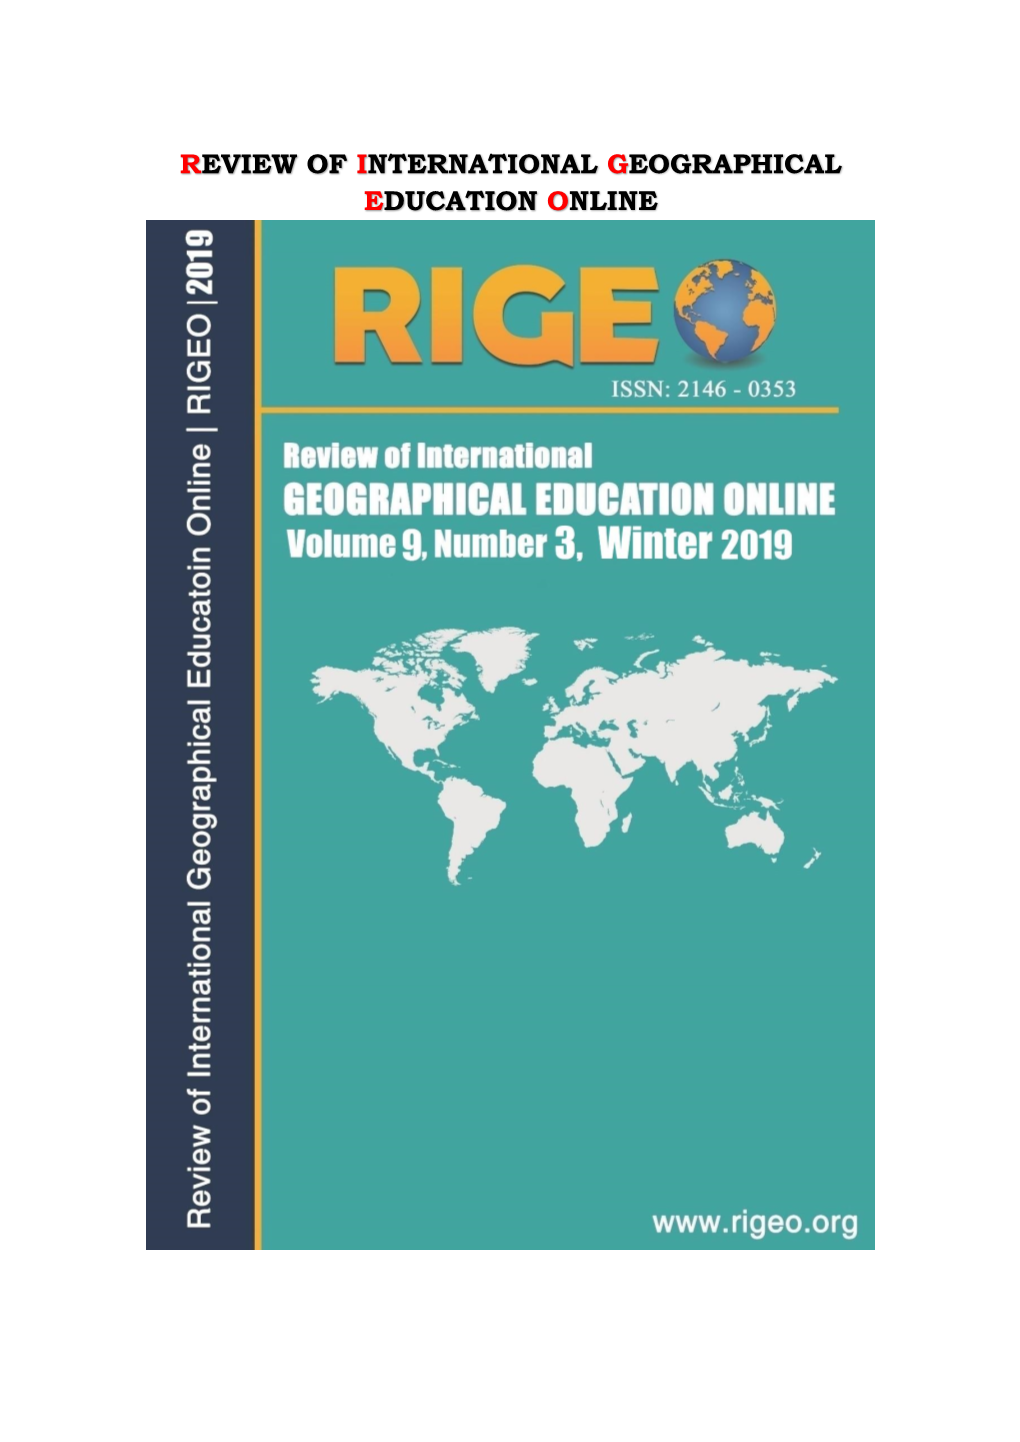 Review of International Geographical Education Online